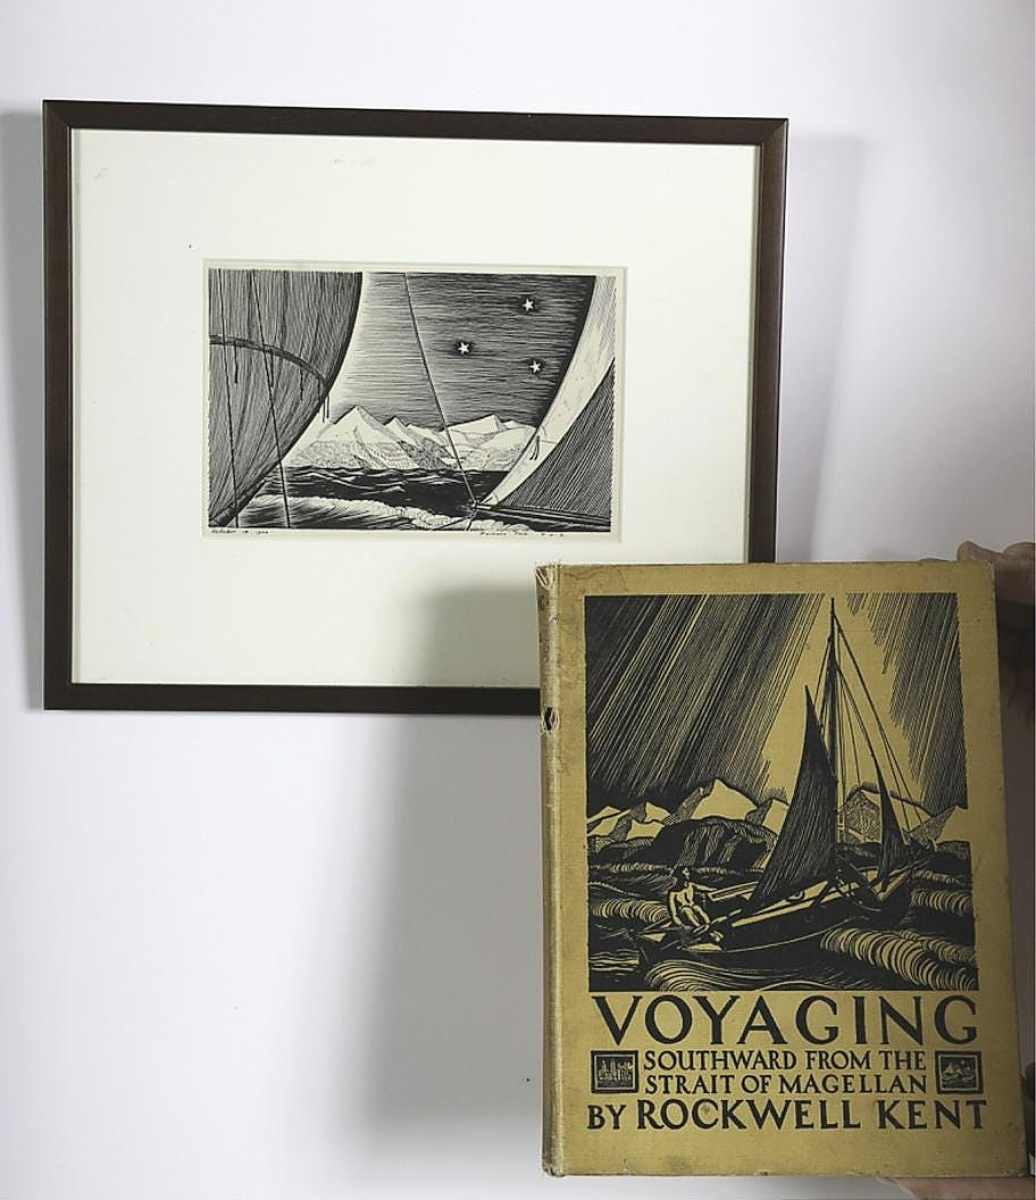 An ink on paper drawing signed and dated by Rockwell Kent earned $15,600. The drawing was an illustration for Voyaging Southward From The Strait of Magellan, appearing on page 49. A copy of the book accompanied the drawing.